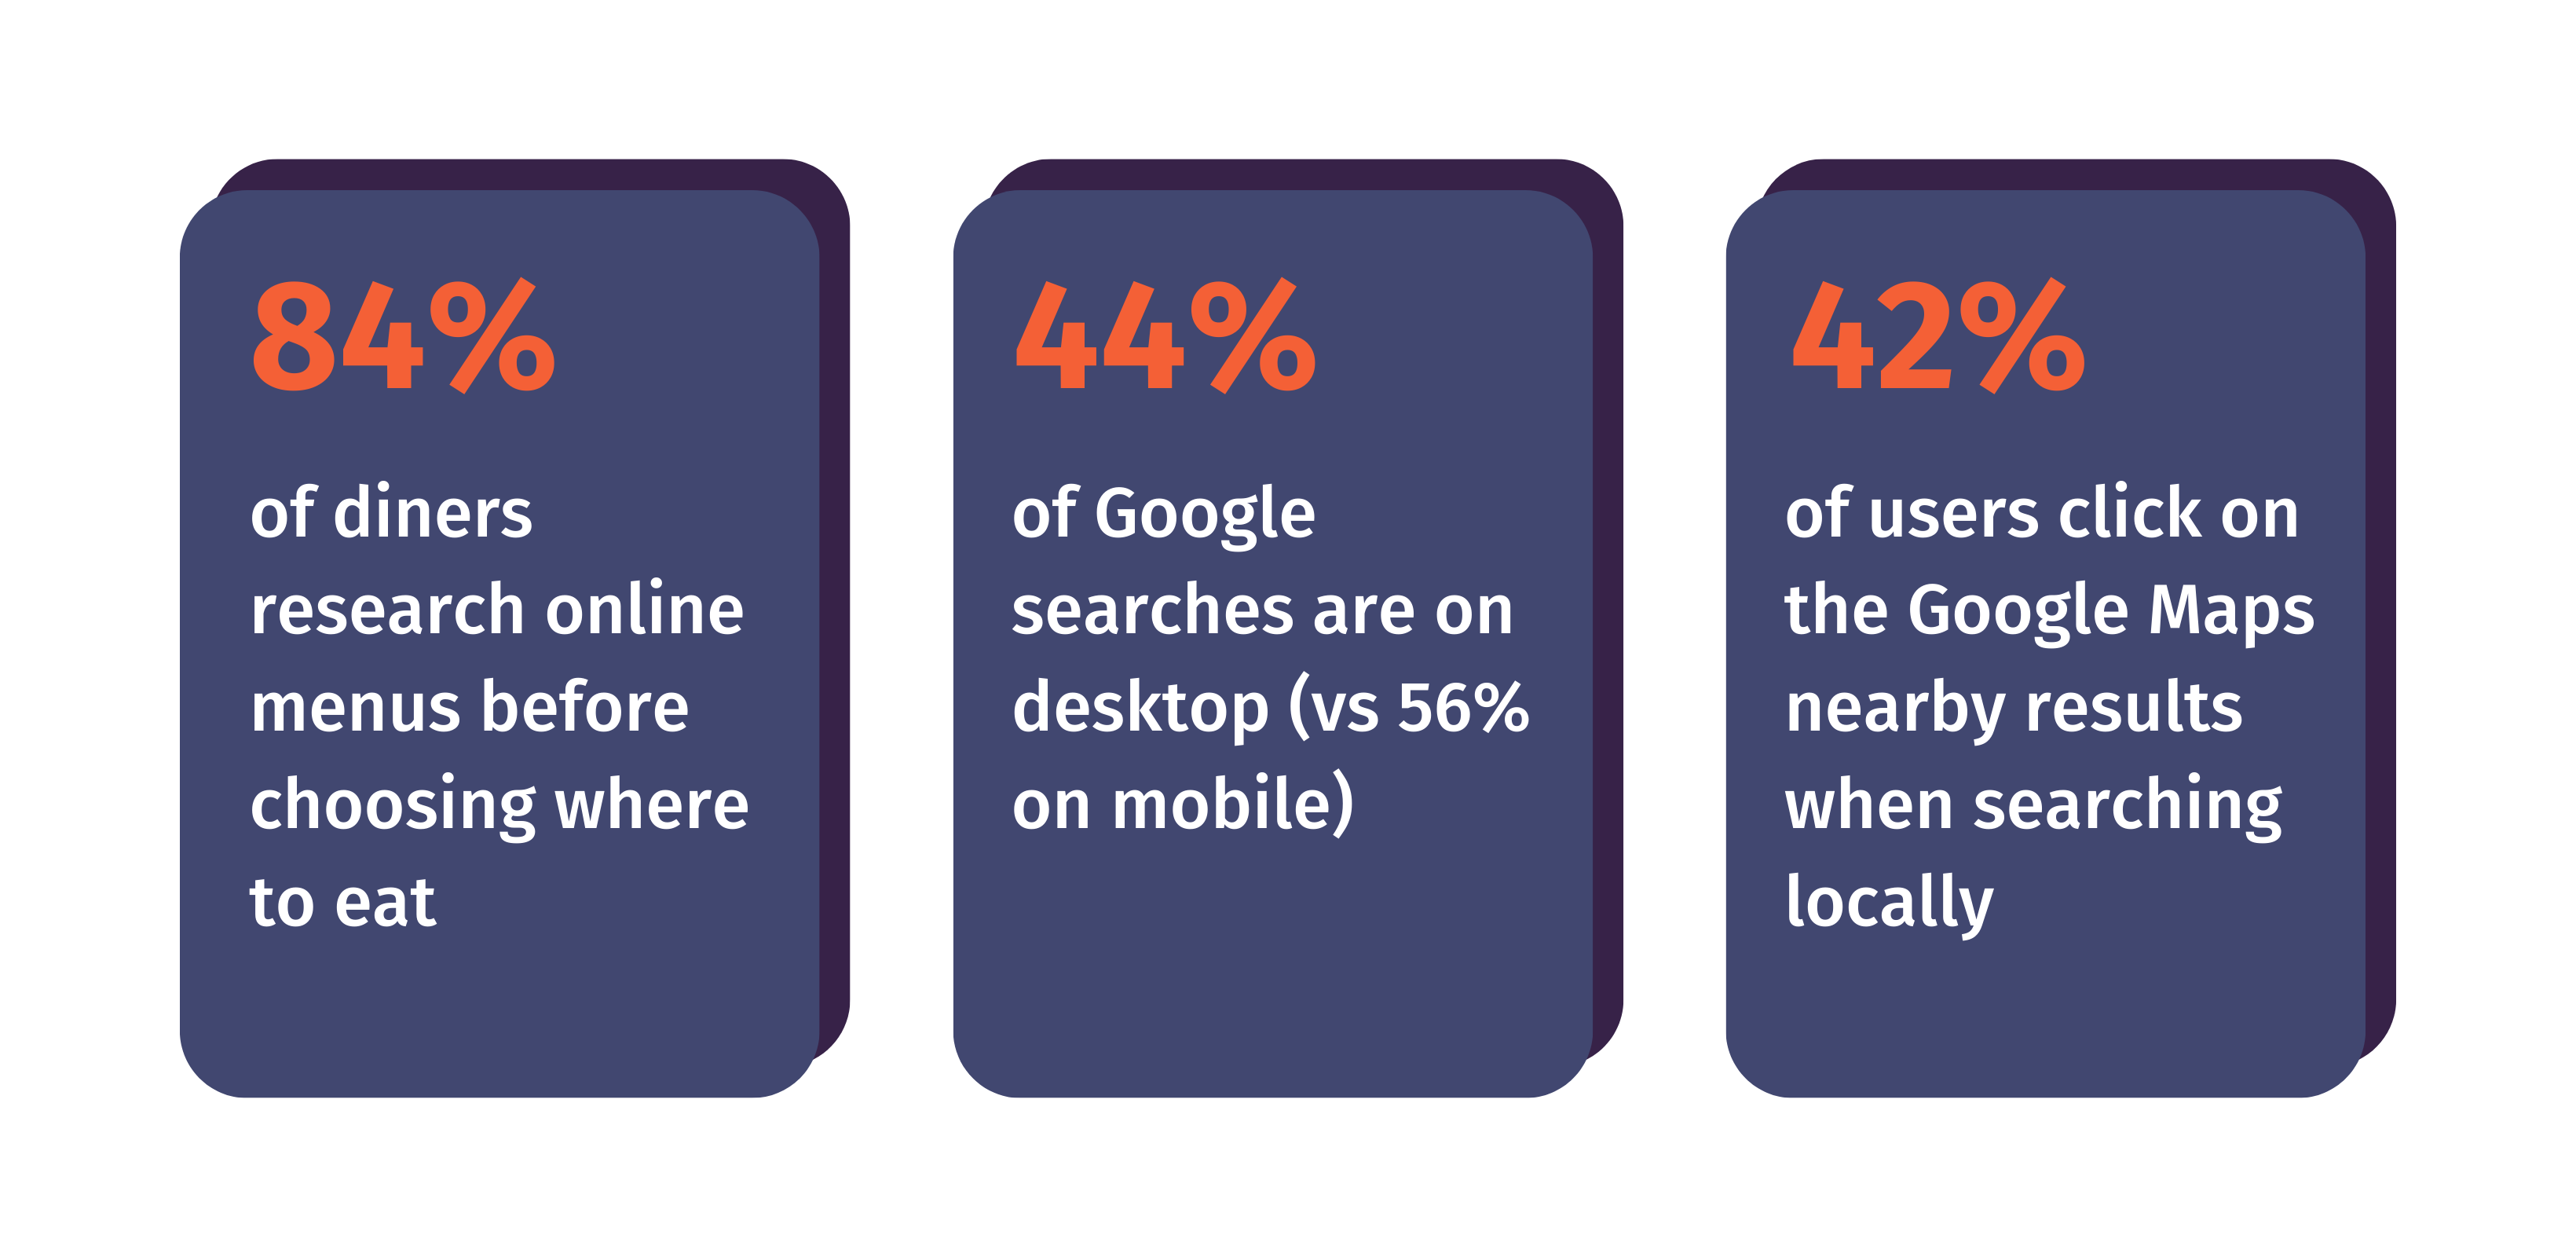 84% of diners research online menus before choosing where to eat, 44% of Google searches are on desktop, and 42% of users click on the Google Maps nearby results when searching locally.